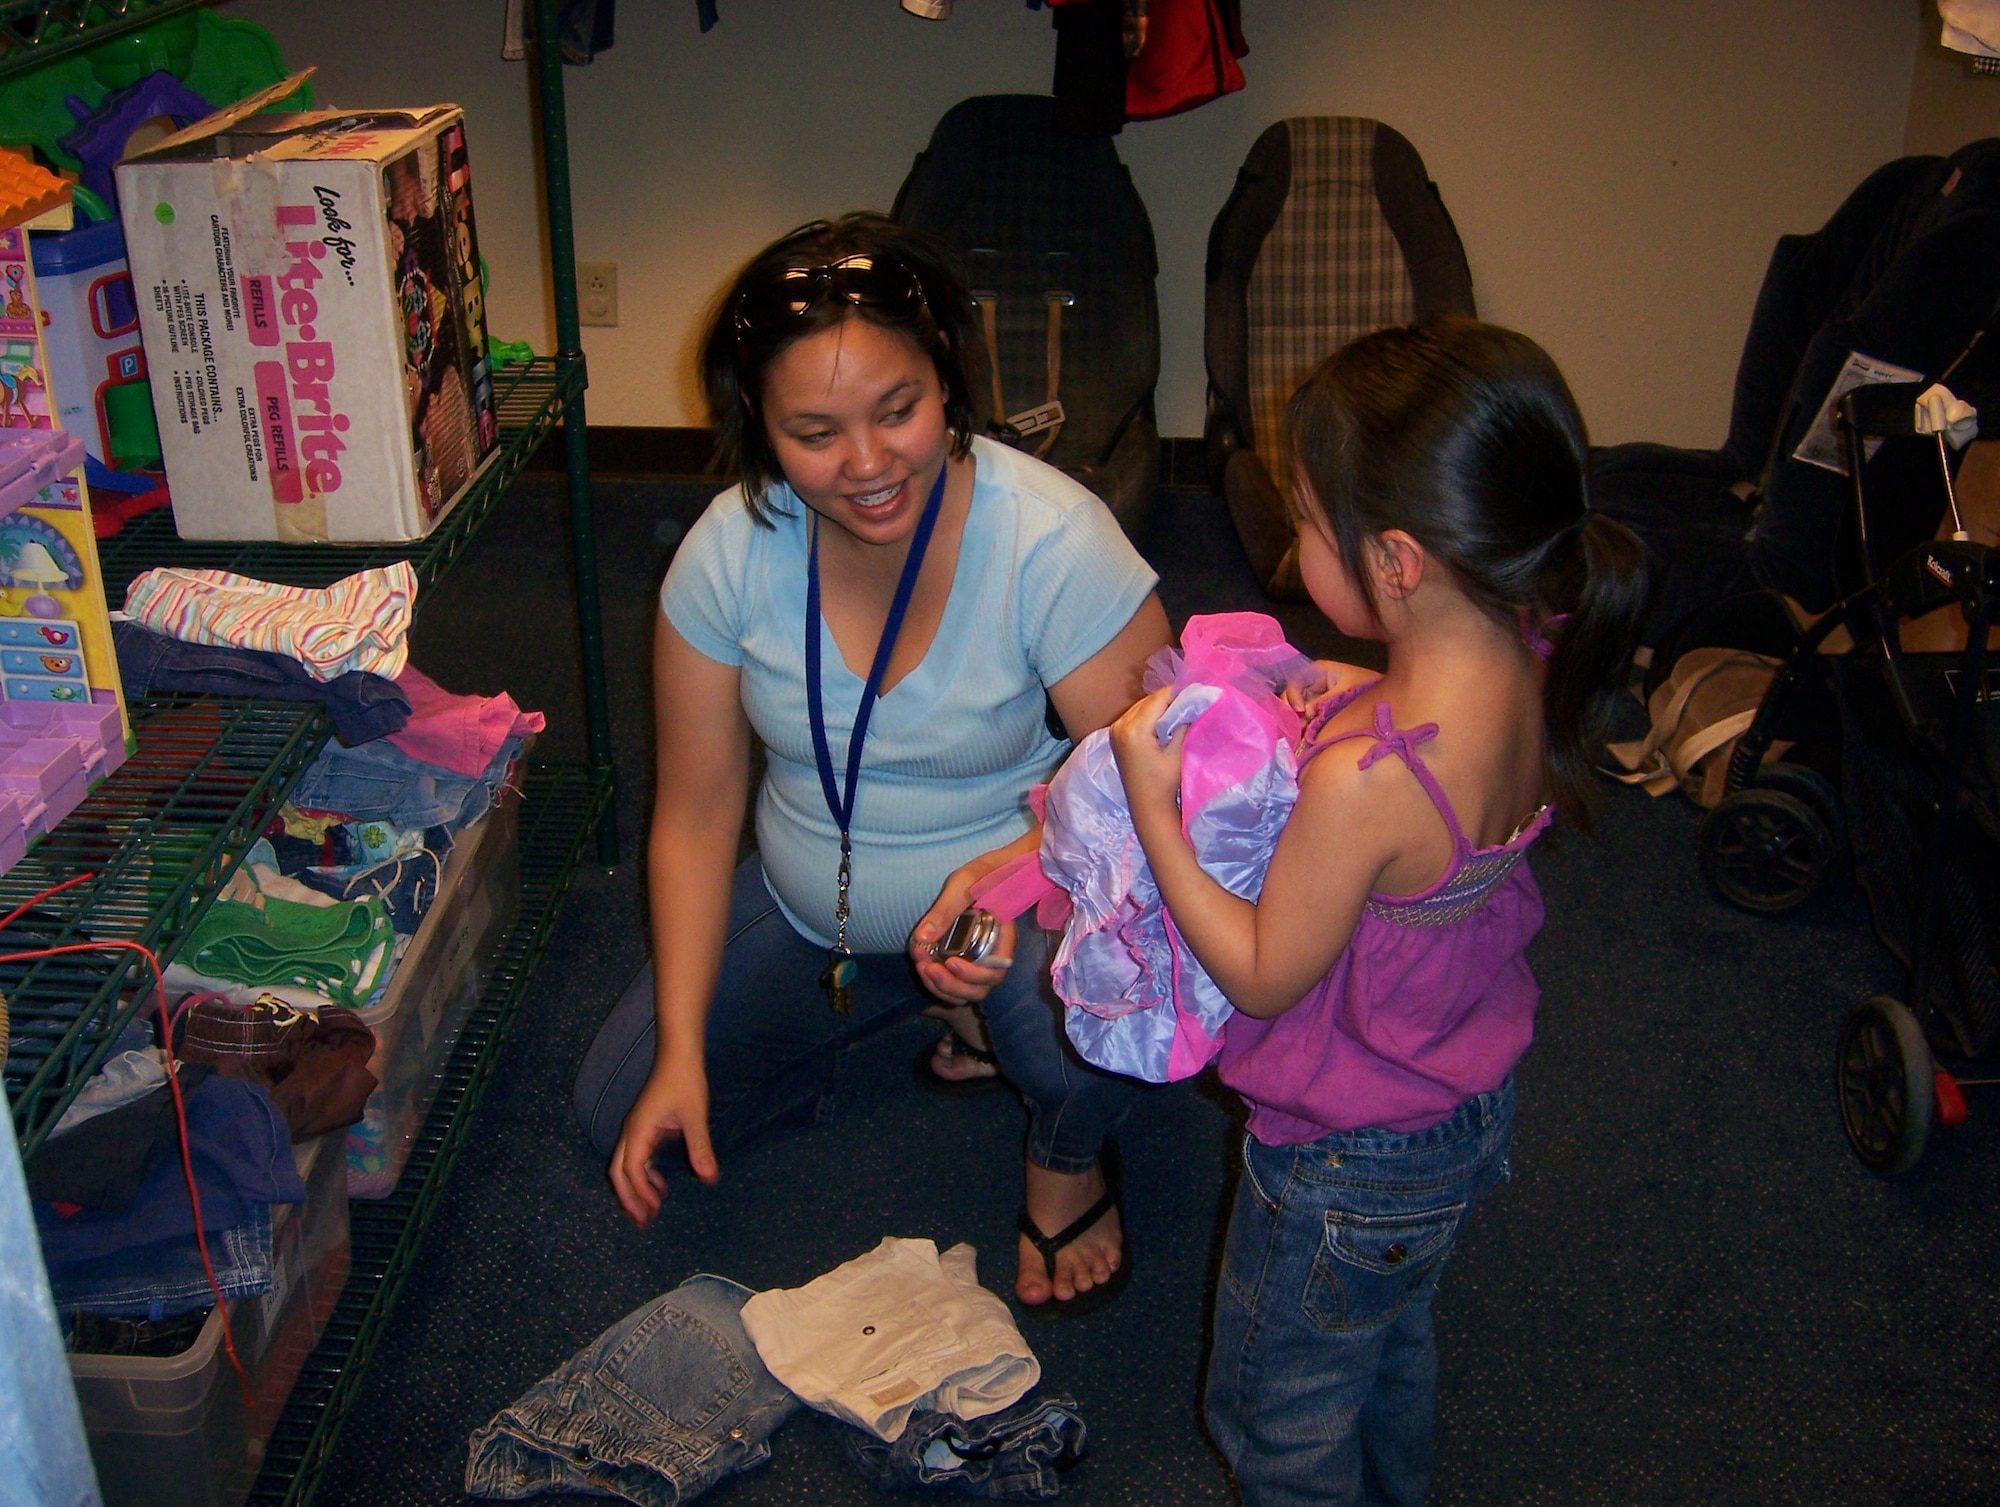 An Andersen mother selects new clothes for her daughter at the Airman’s Attic.  Donors supply the Attic with a wide variety of items such as military uniforms, household goods, sporting equipment, and  more.  The Airman’s Attic is open from 11 a.m. to 3 p.m. Monday through Friday and from 9 a.m. to noon the second and fourth Saturday each month. (U.S. Air Force photo by Airman 1st Class Carissa Morgan/36th Wing Public Affairs)